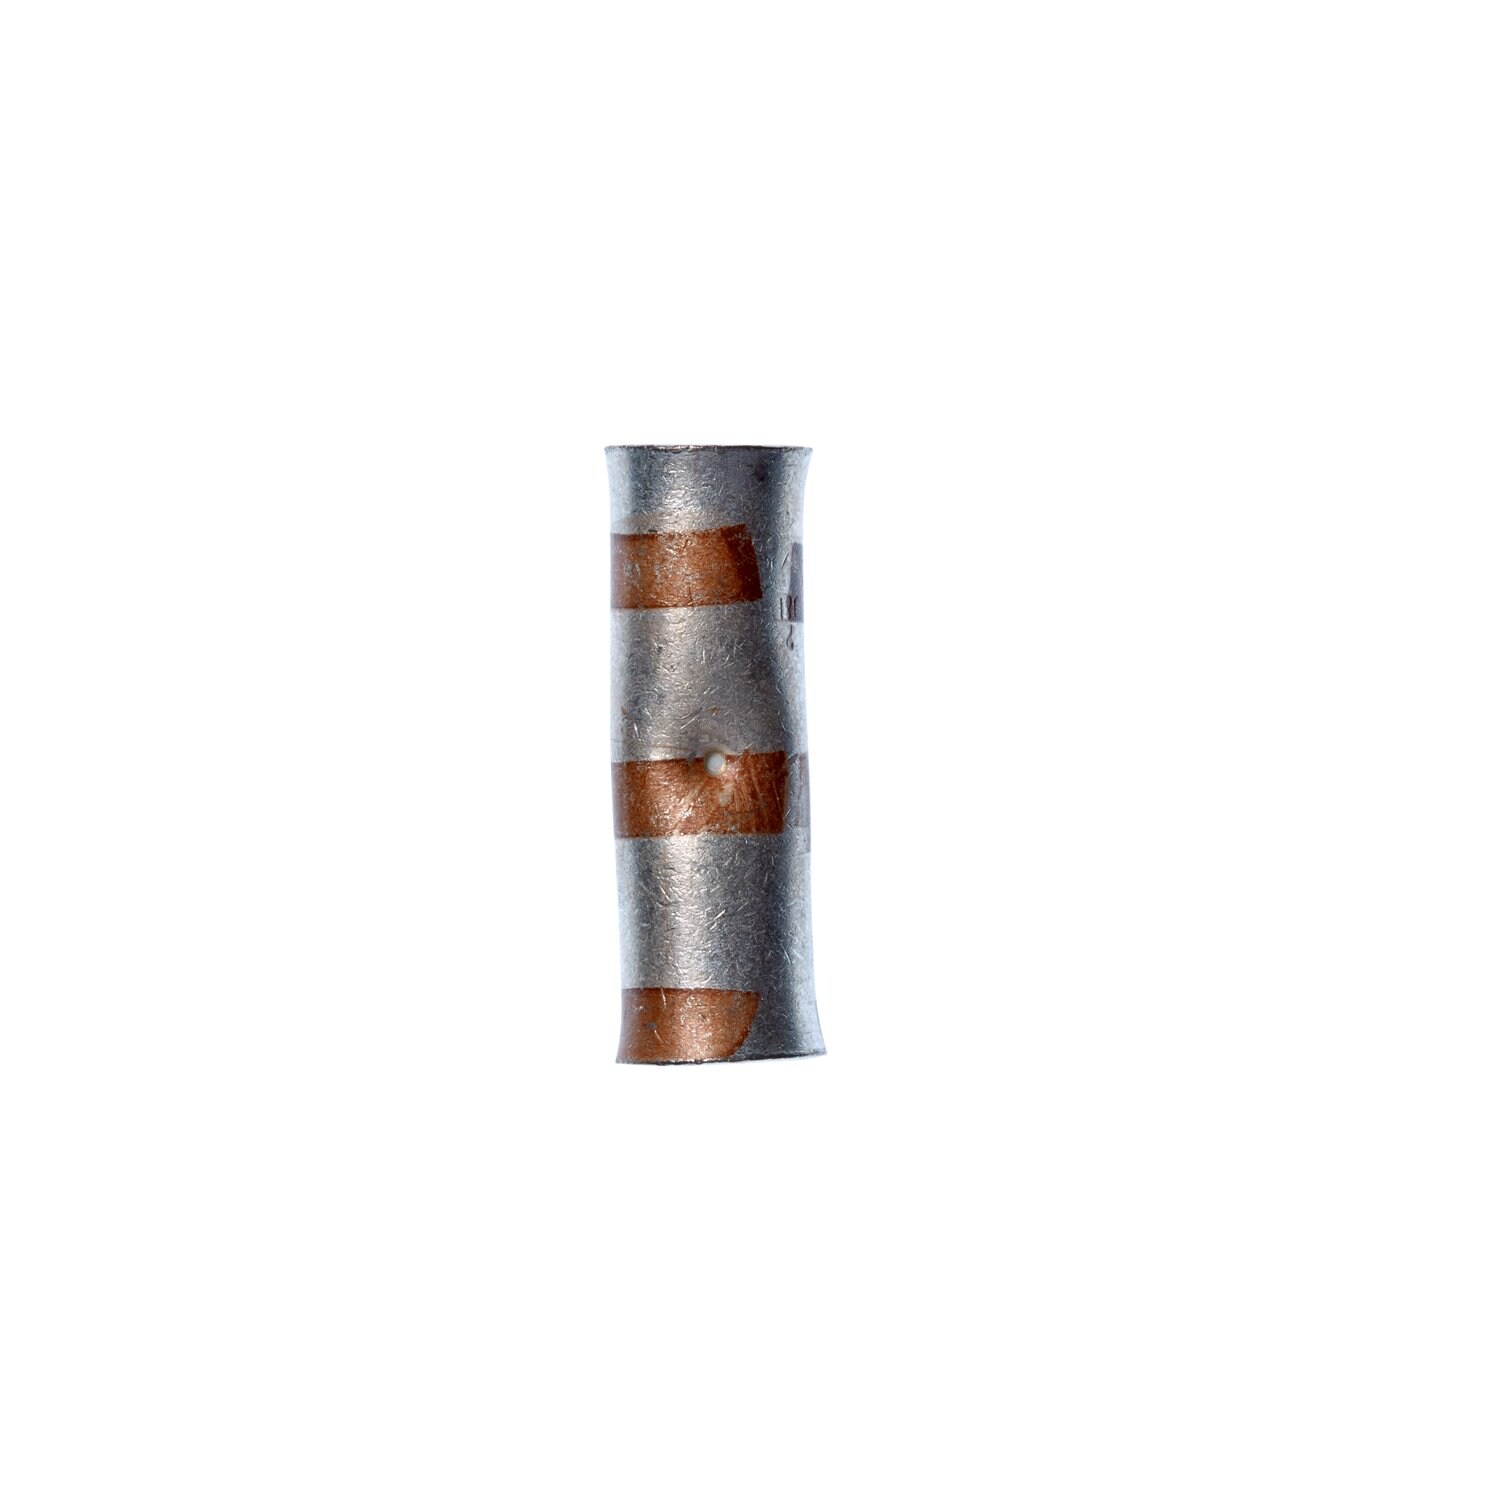 7100045111 - 3M Scotchlok Large Gauge Ring Tongue, Copper Non-Insulated Seamless
MC3/0-12RX, Stud Size 1/2, 60/Case